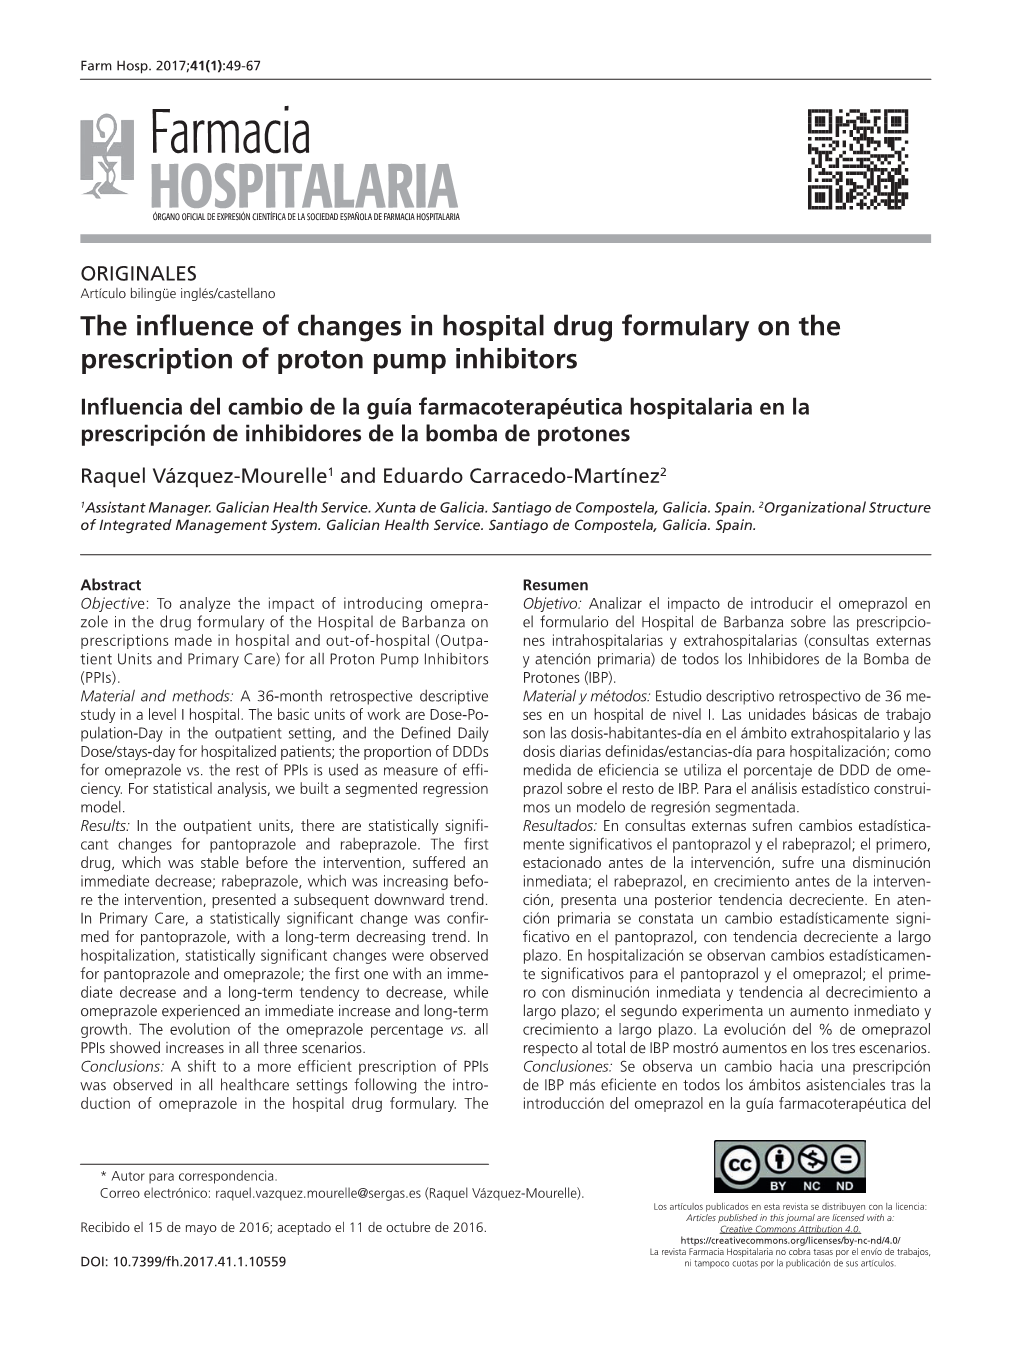 The Influence of Changes in Hospital Drug Formulary on the Prescription of Proton Pump Inhibitors